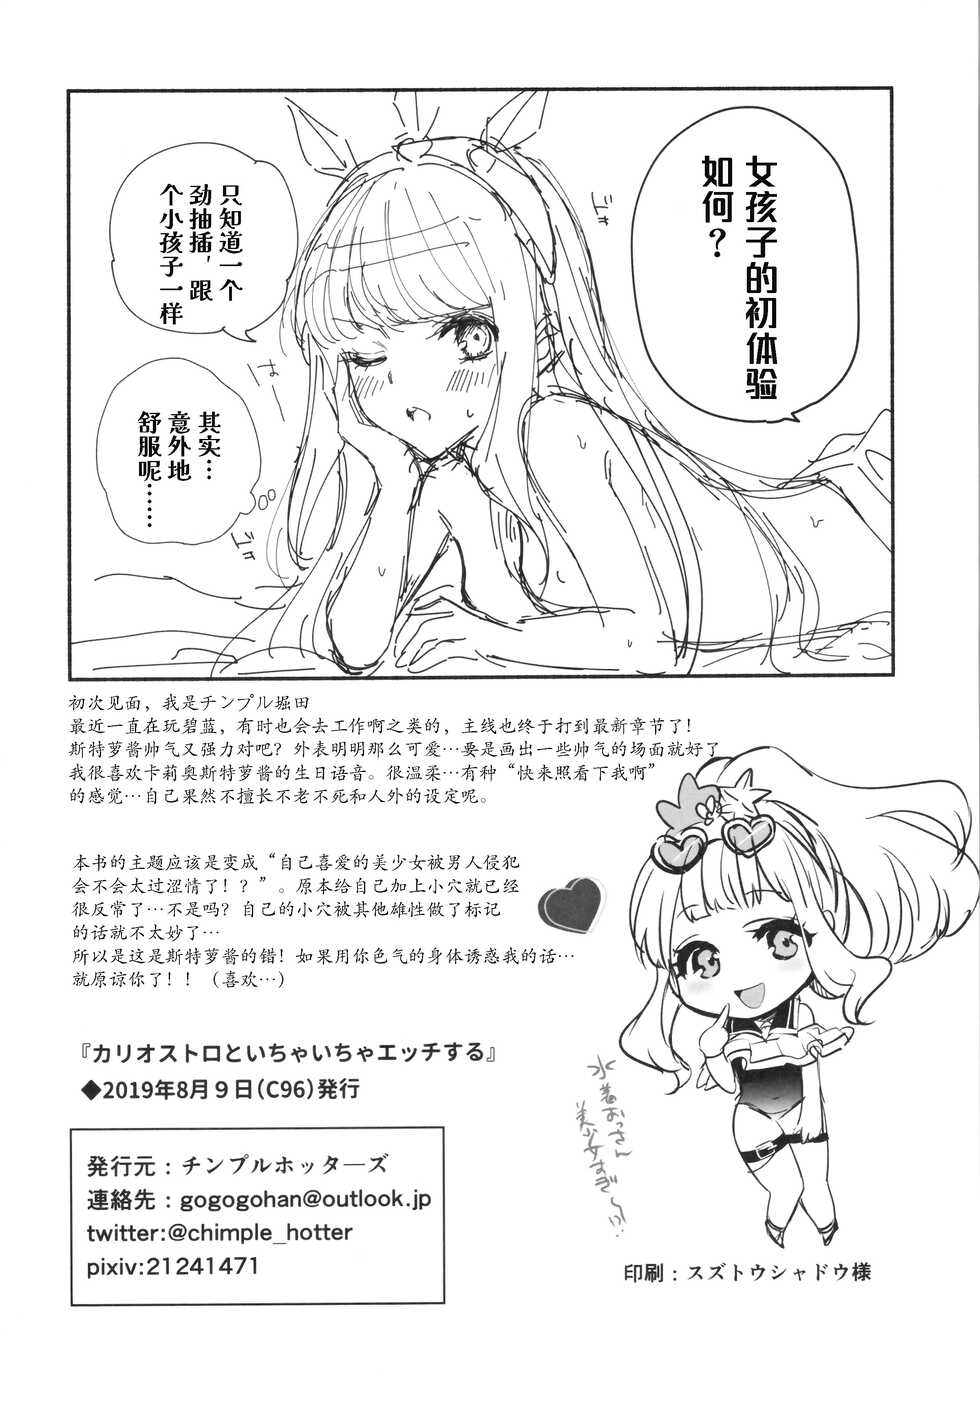 (C96) [Chimple Hotters (Chimple Hotter)] Cagliostro to Ichaicha Ecchi Suru | 与卡莉奥斯特罗没羞没臊地H性爱 (Granblue Fantasy) [Chinese] [hEROs汉化组] - Page 21